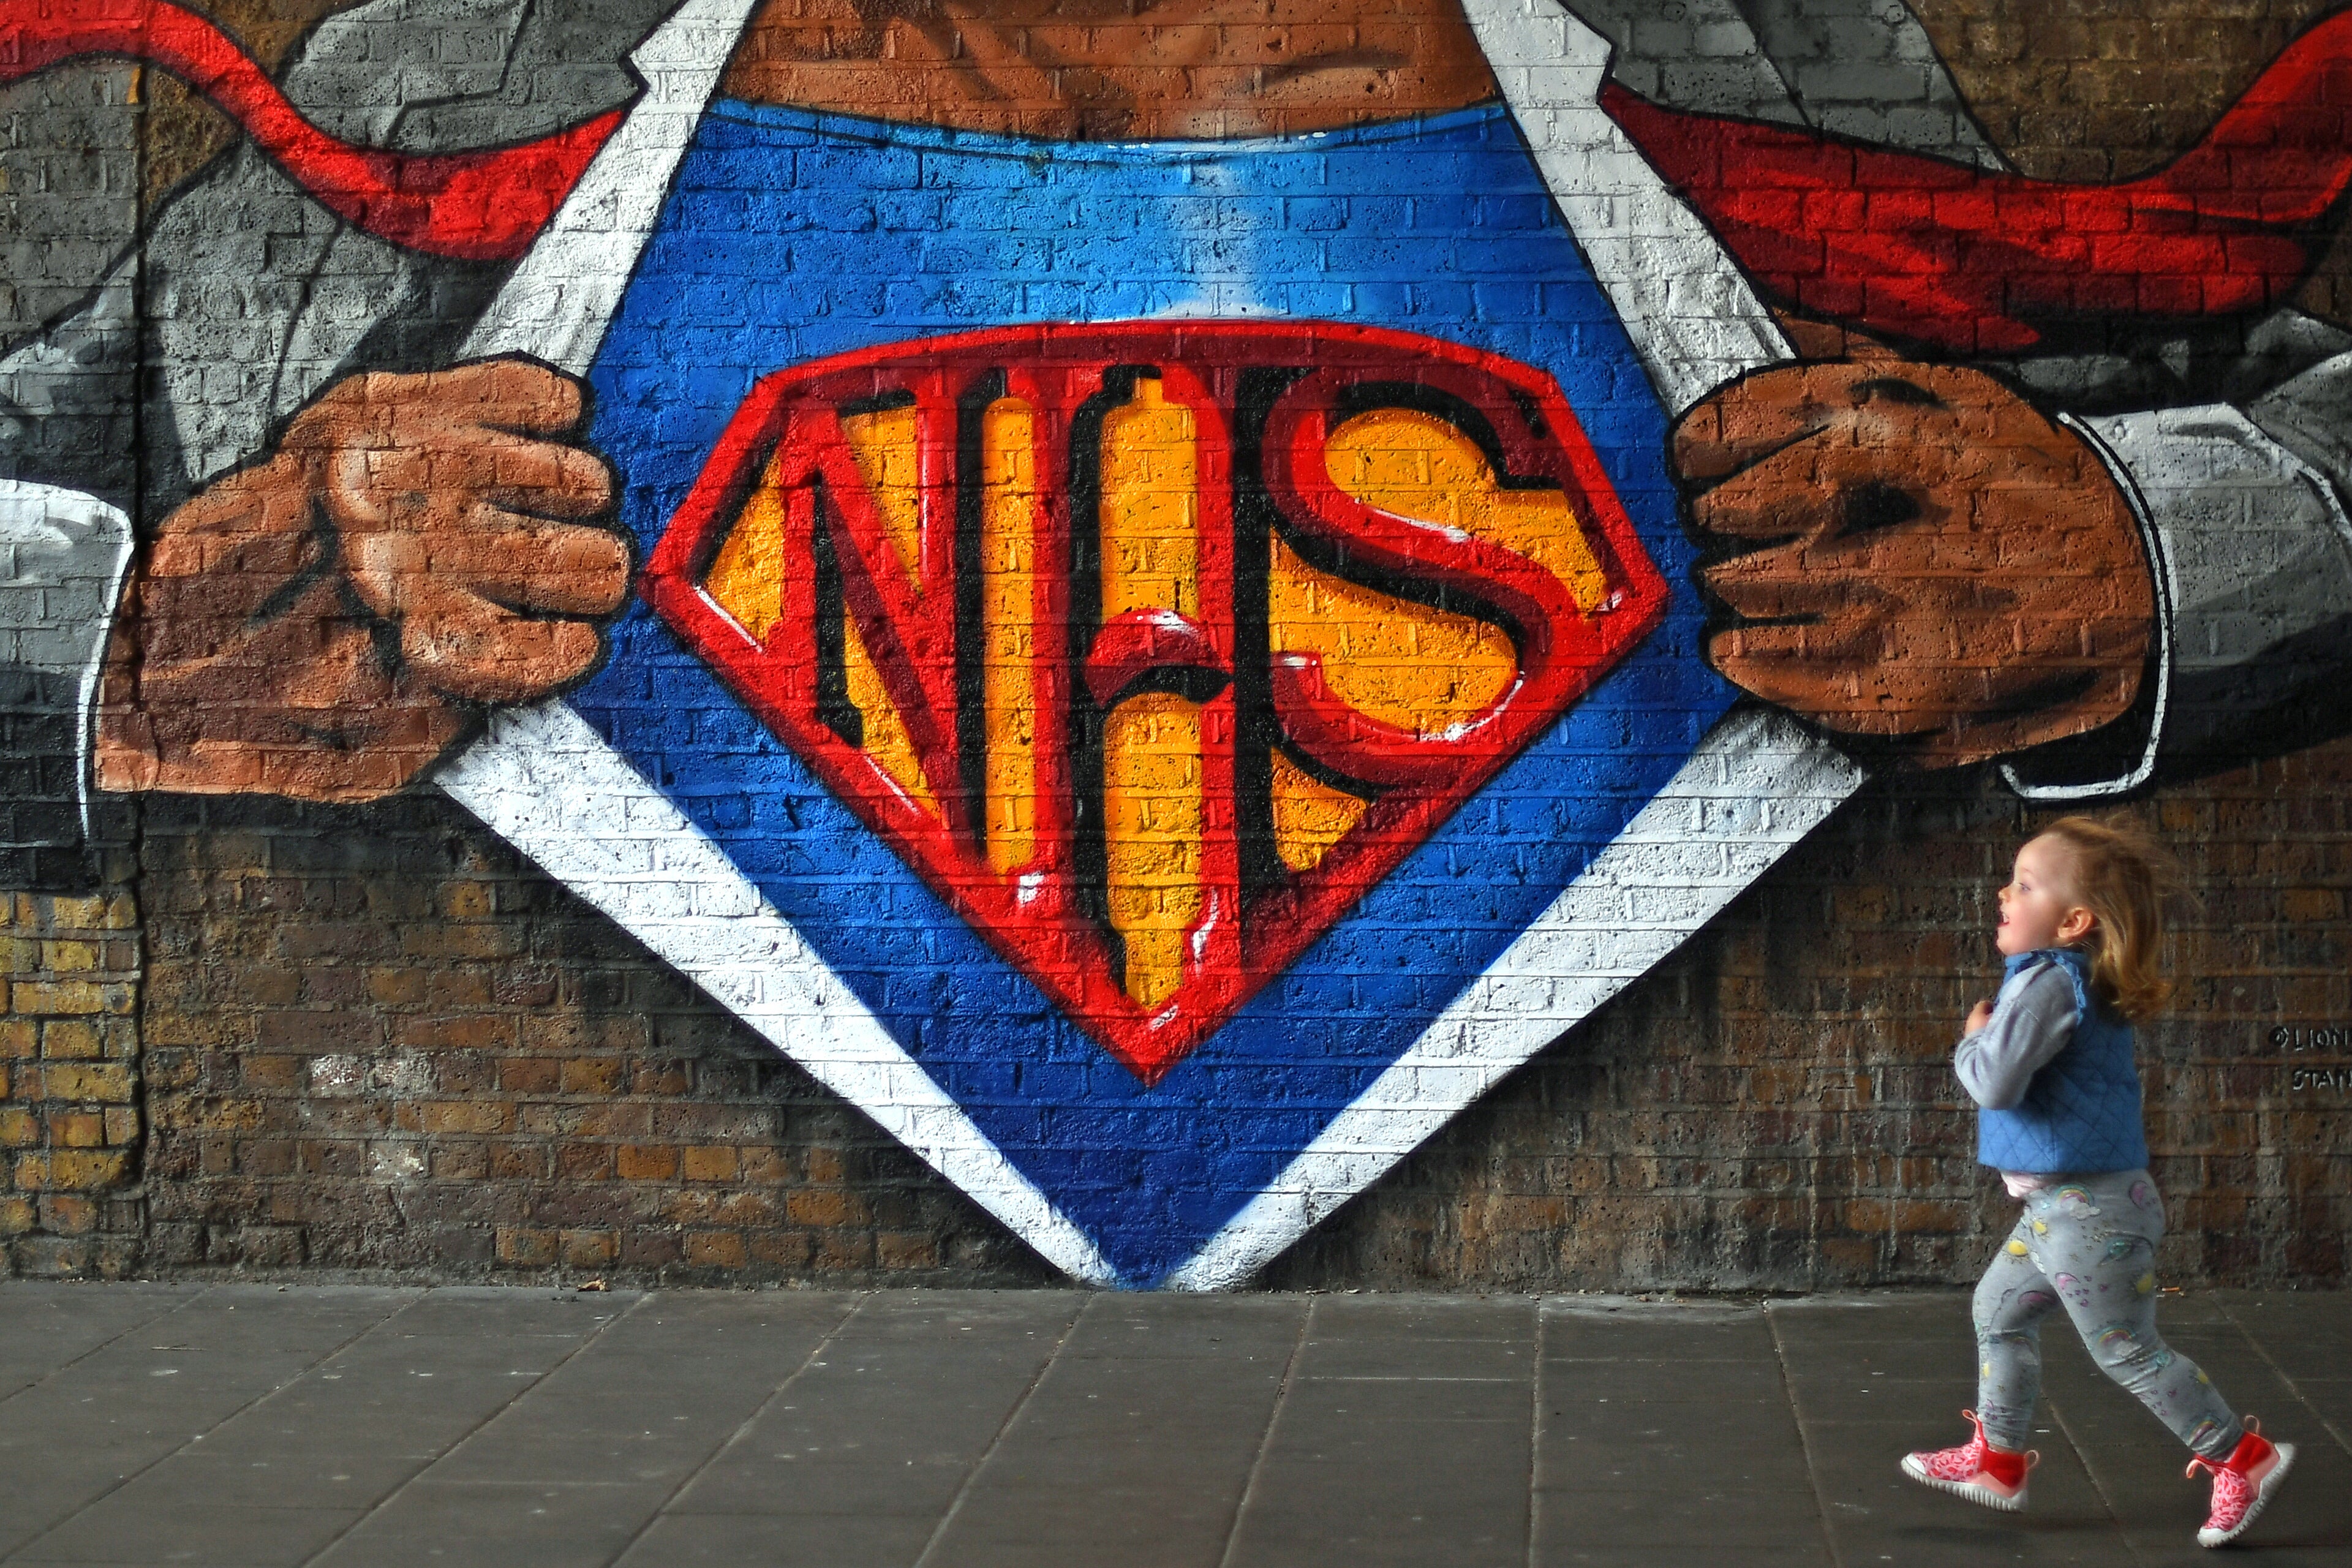 Money from a wealth tax could be used to support services like the NHS